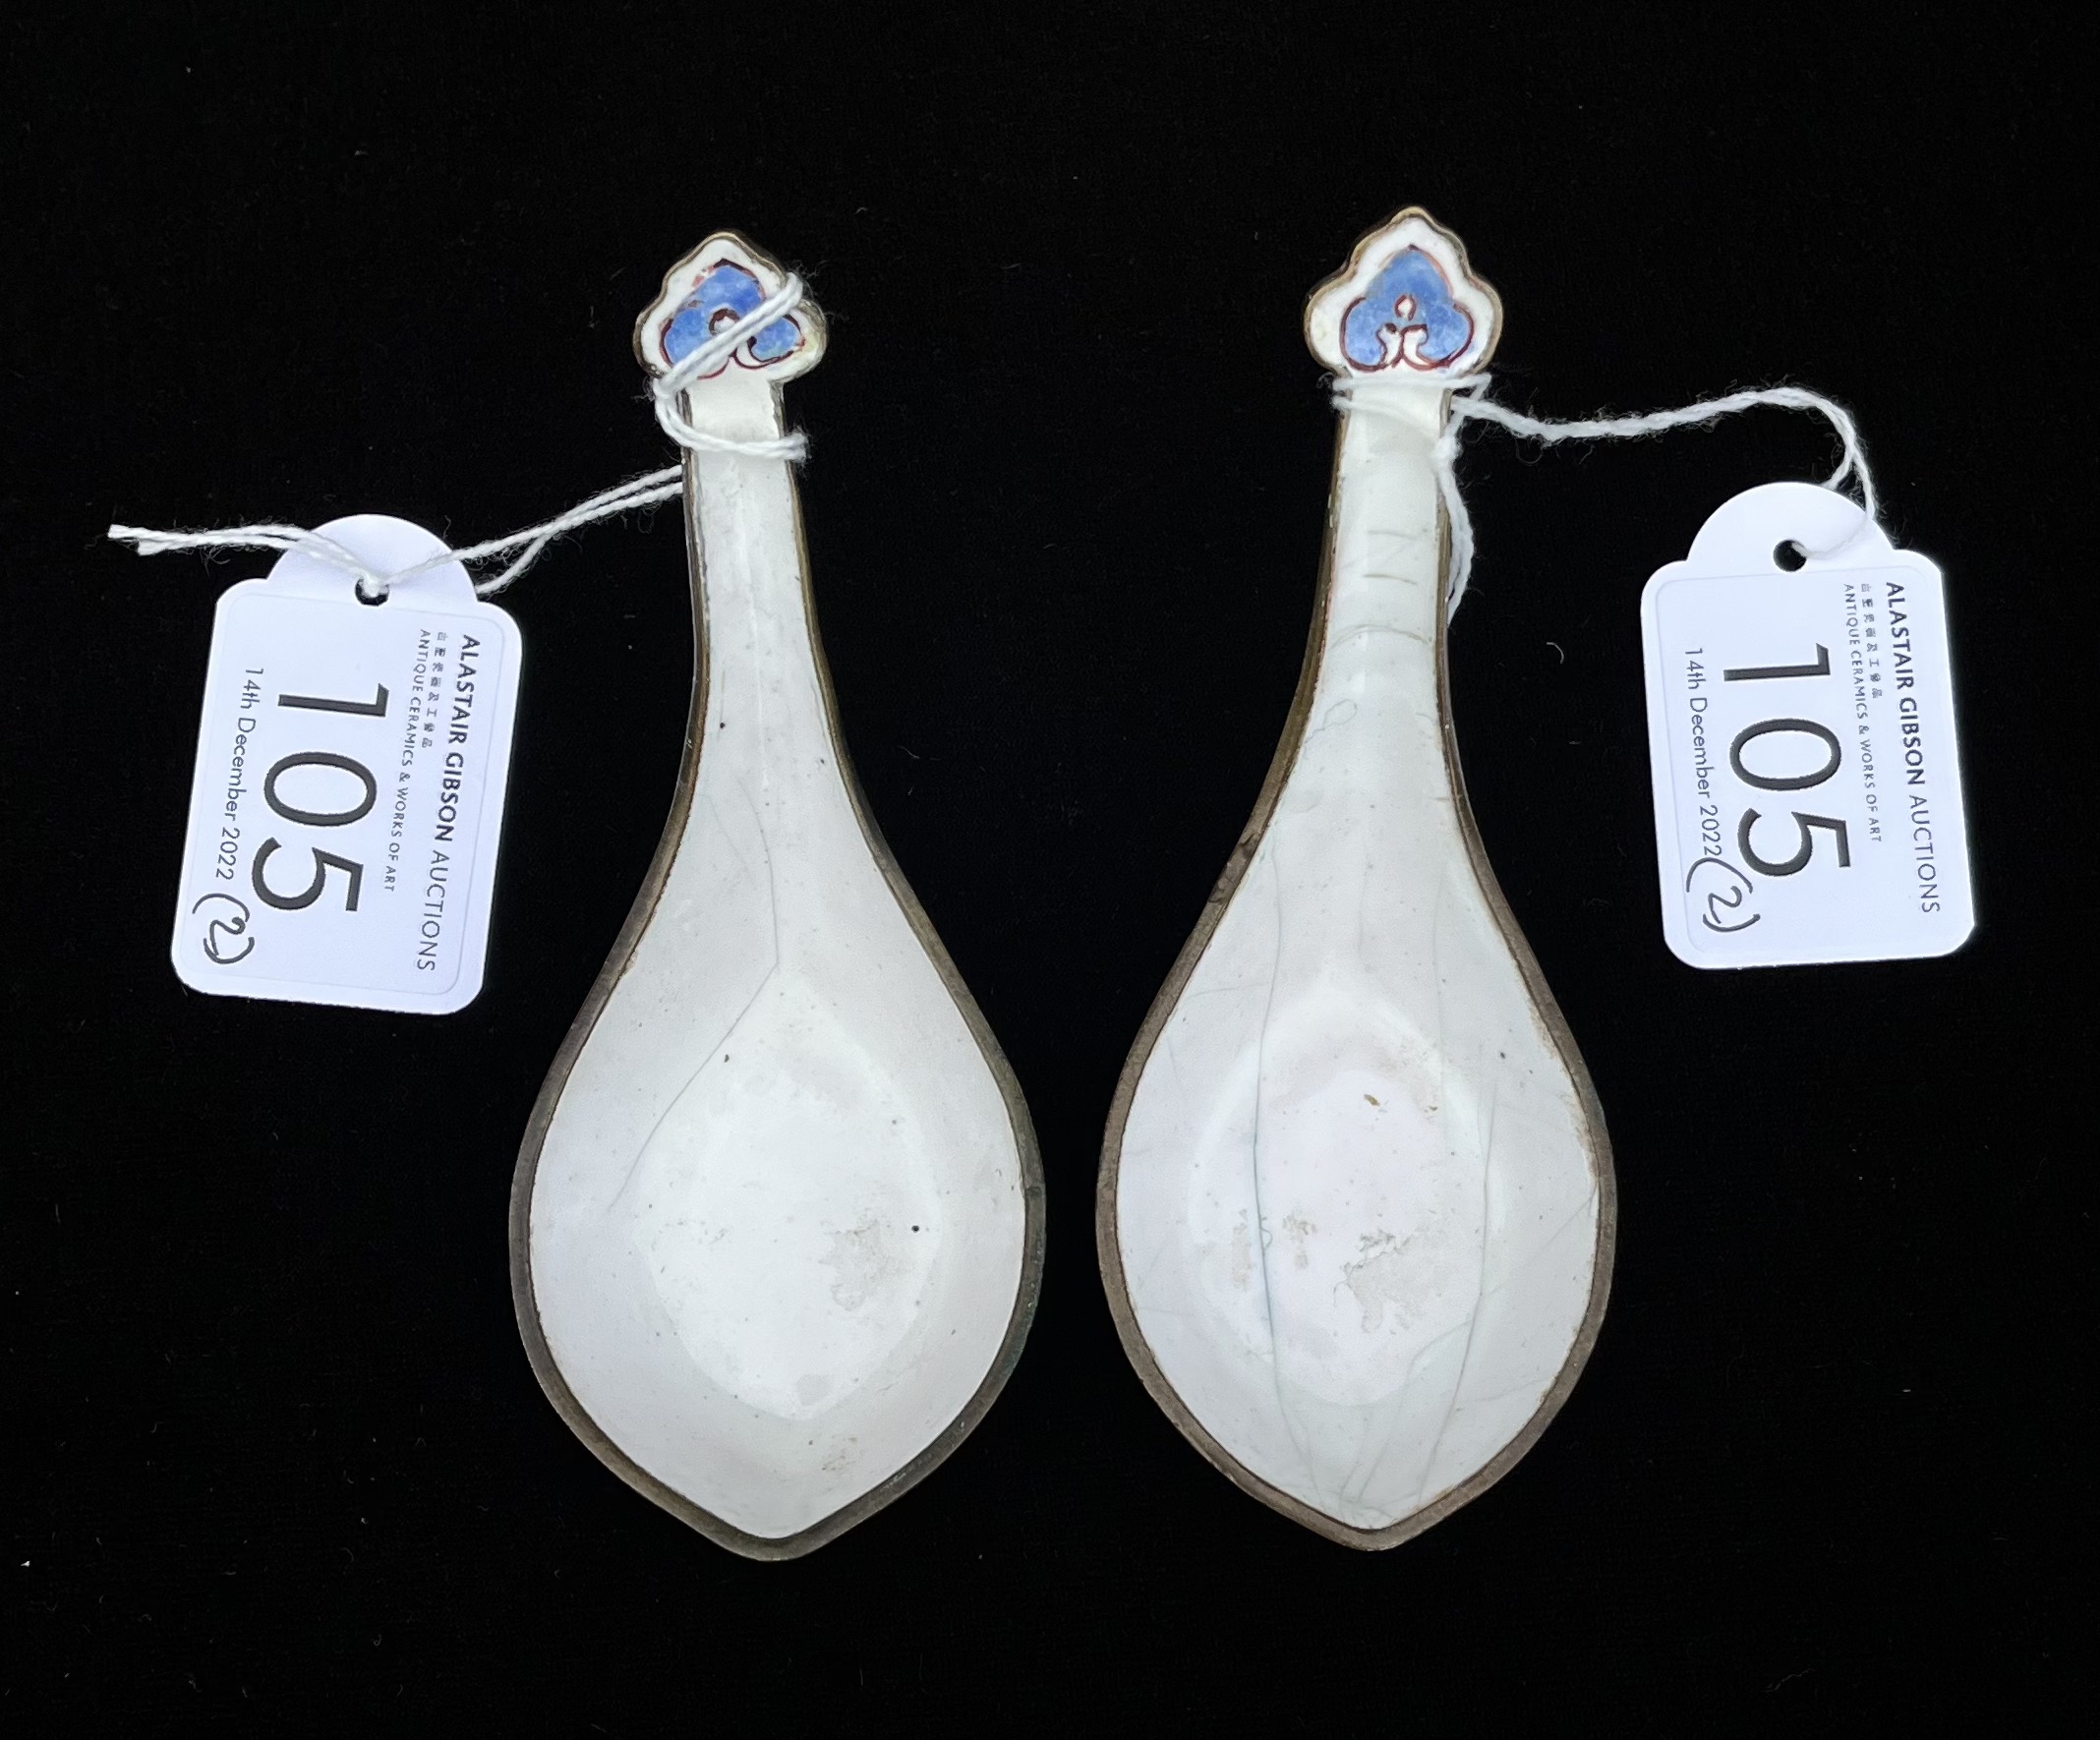 A PAIR OF CANTON ENAMEL SPOONS, QING DYNASTY, QIANLONG PERIOD, 1736 – 1795 - Image 3 of 6